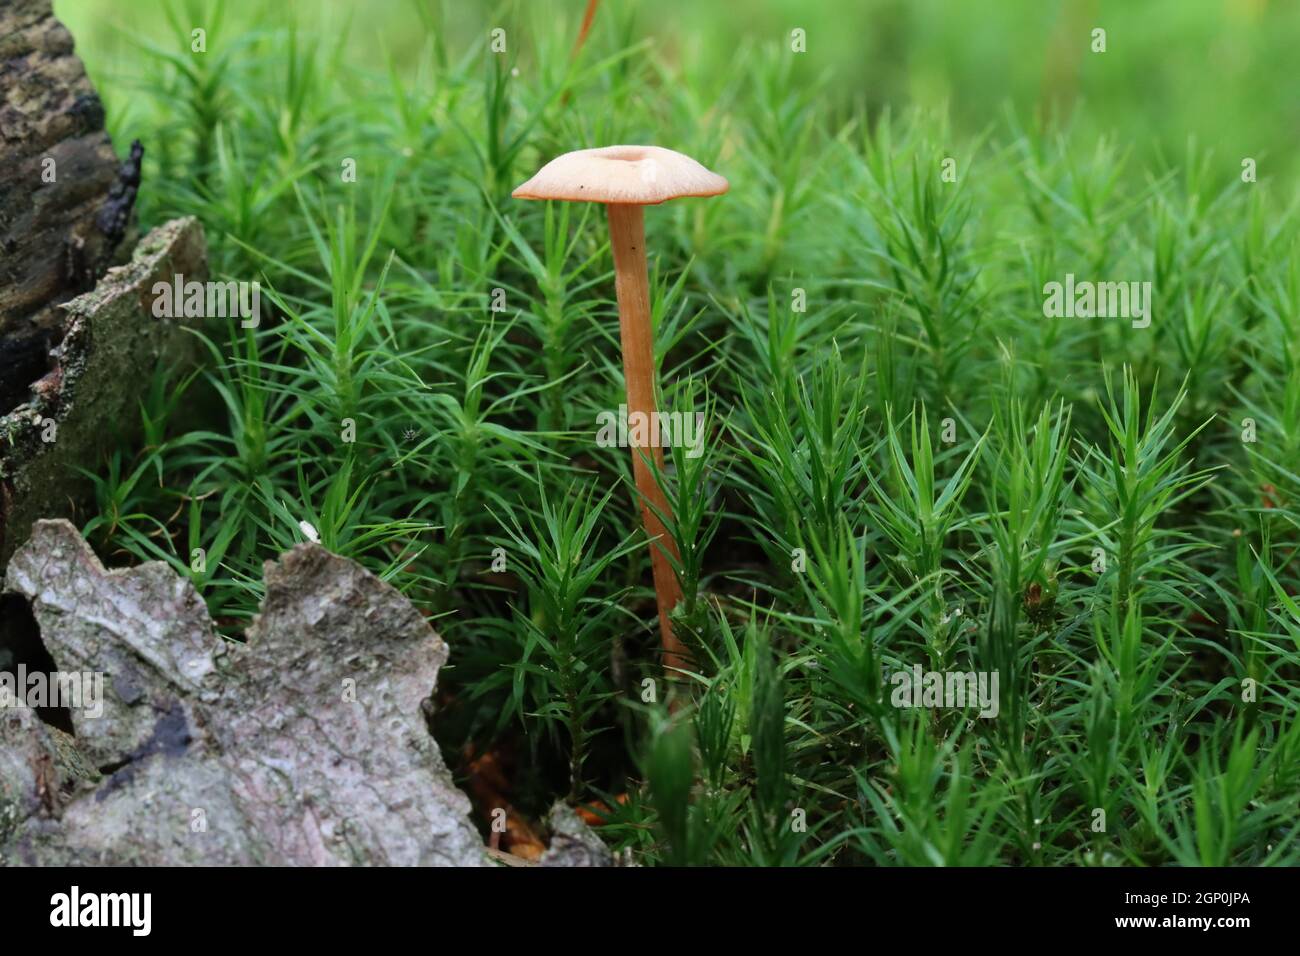 a small, fragile-looking, light brown fungus grows on a forest floor between dark green star-shaped moss and gray bark pieces, close-up, side view Stock Photo